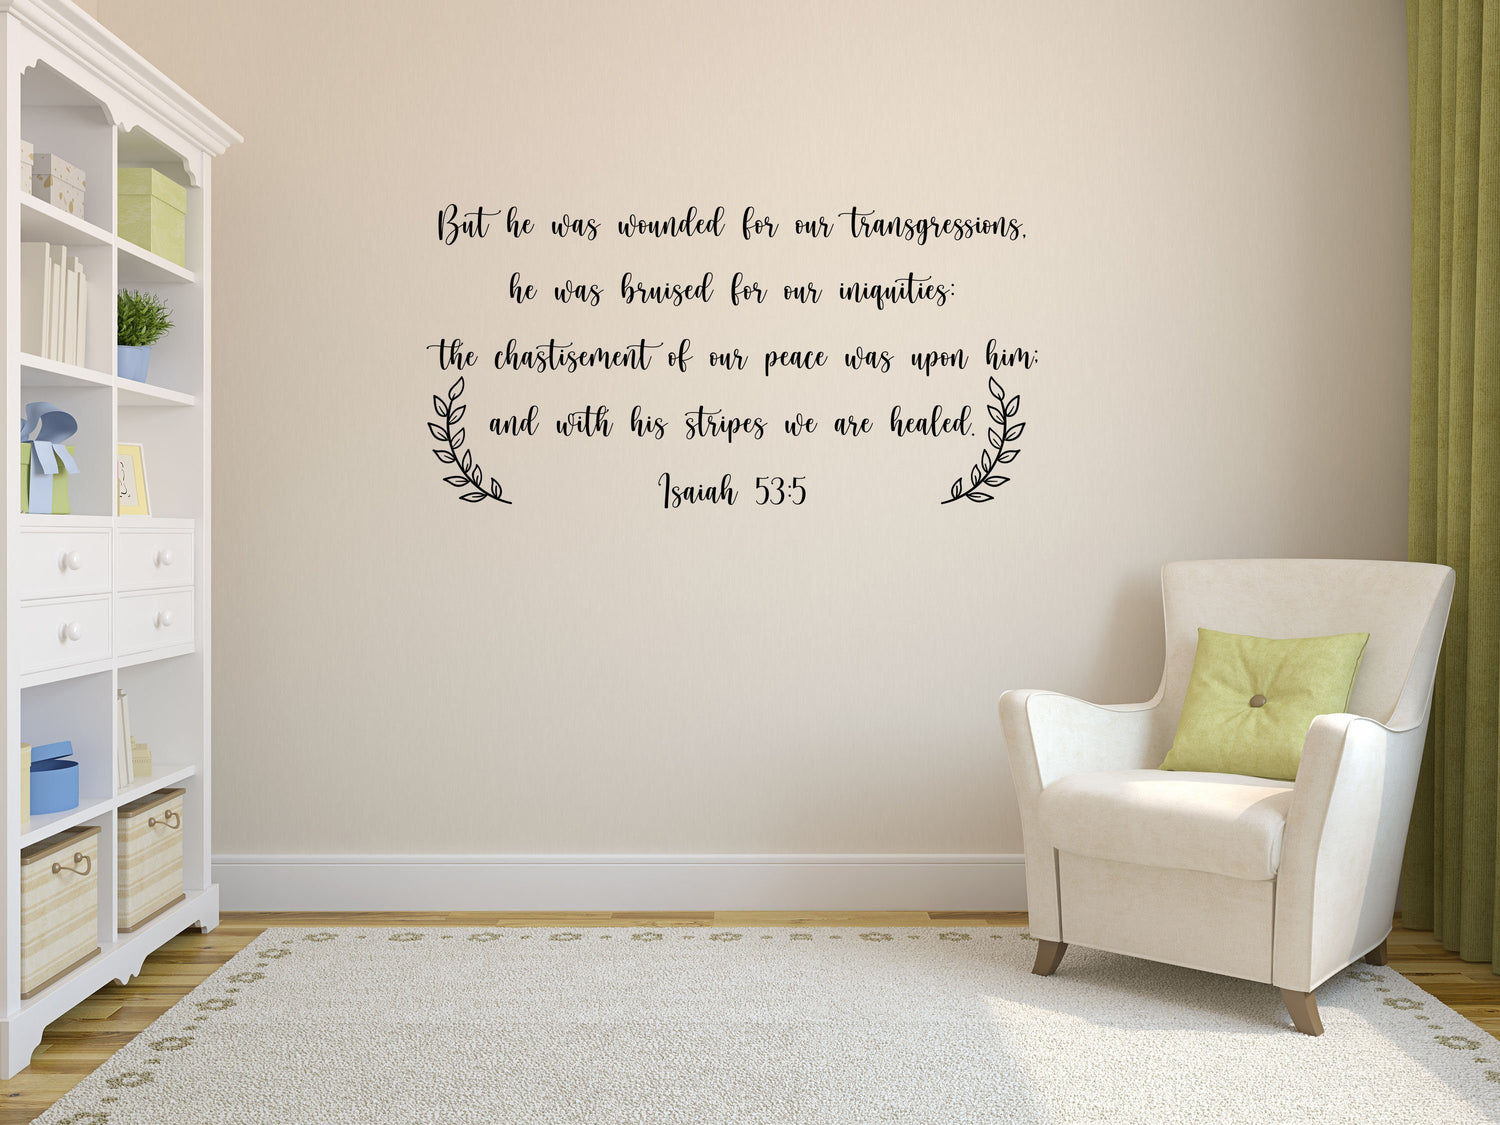 Isaiah 53:5 Scripture Wall Decal - Christian Wall Sticker Quote - Christian Religious Decor- Wounded For Our Transgressions Done 